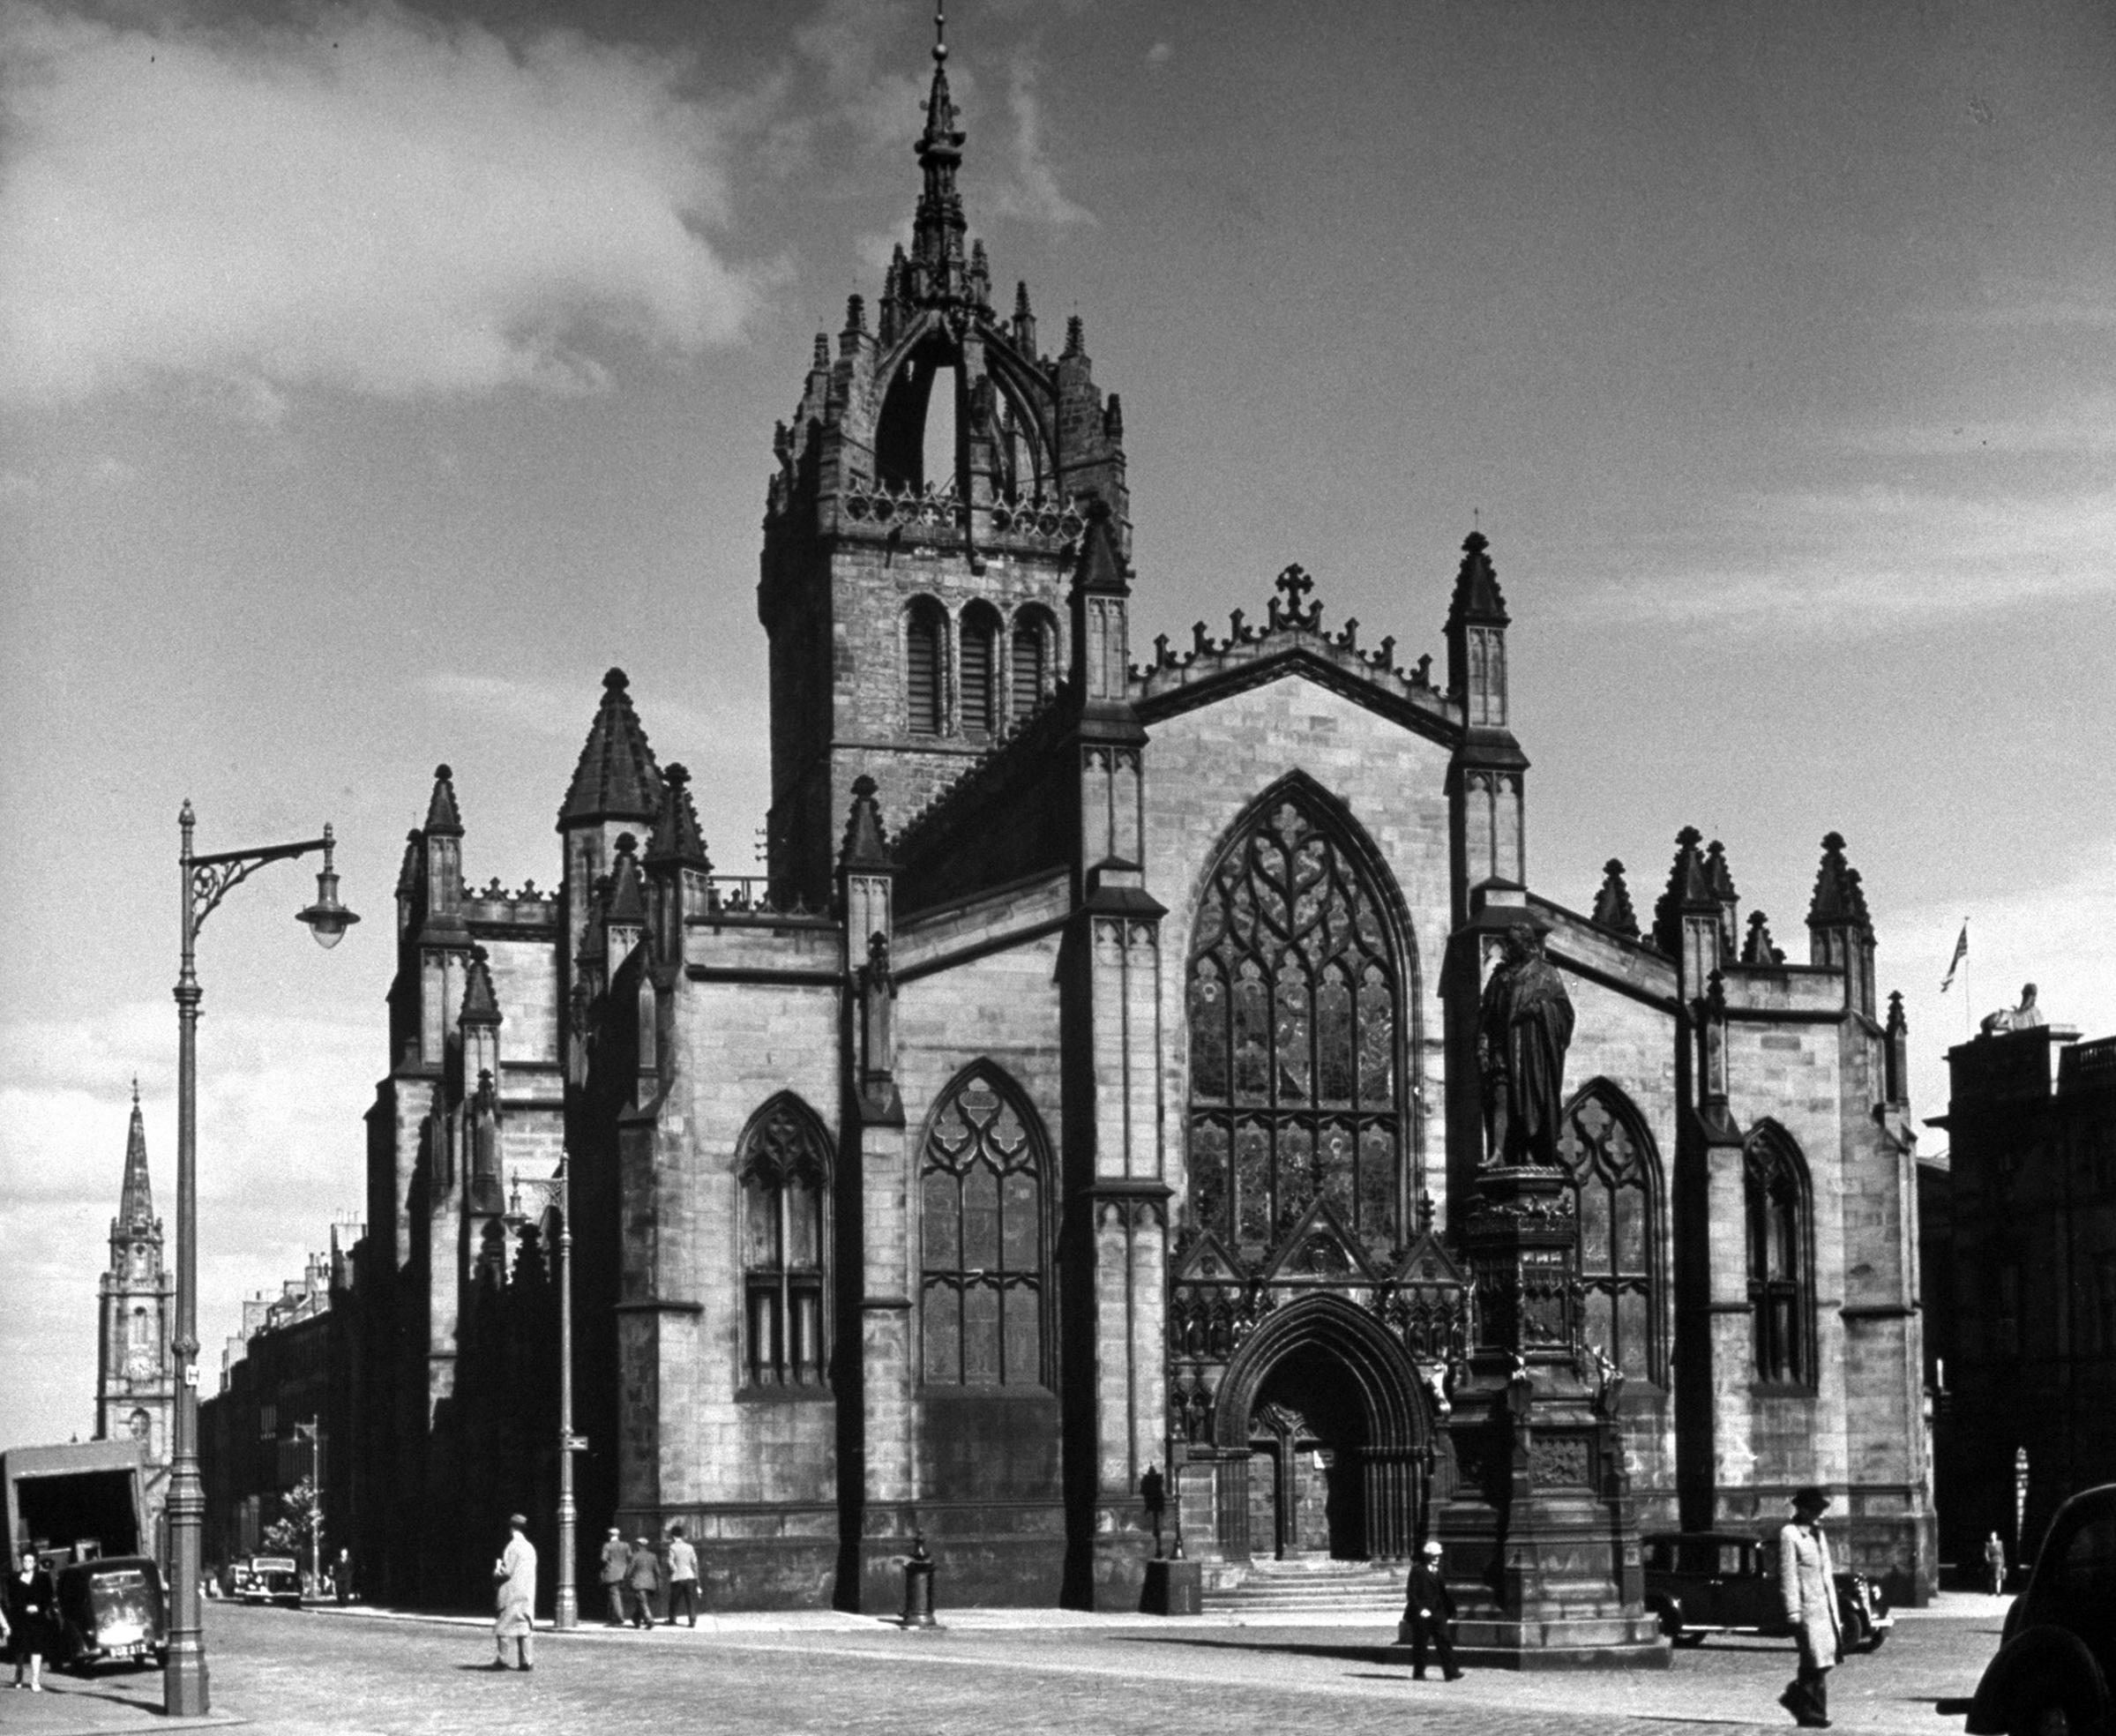 St. Giles Church is where Knox preached. Near it, in now-vanished yard, he may be buried. Nearby also stood Tollbooth Prison (Scott's Heart of Midlothian).